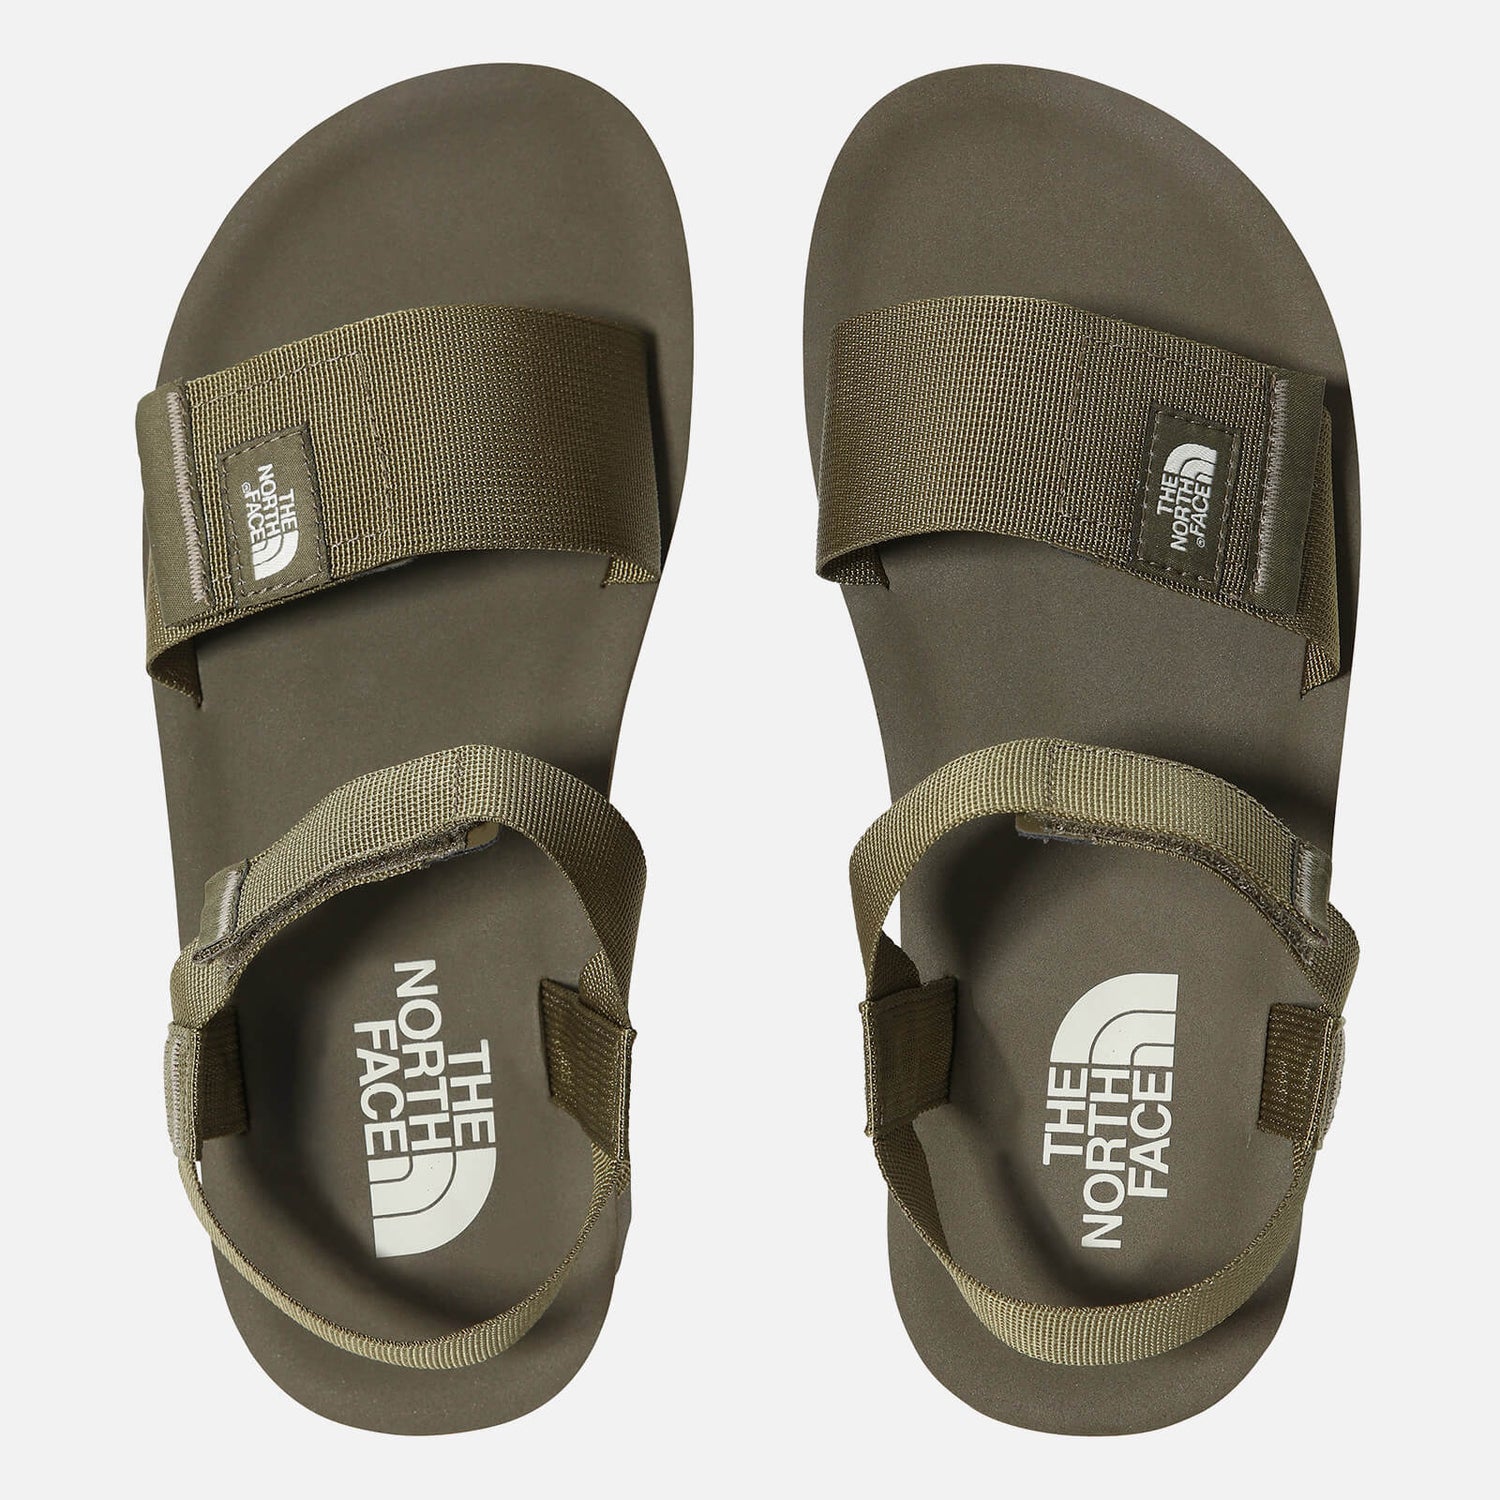 The North Face Skeena Sandles - Military Olive/Mineral Grey